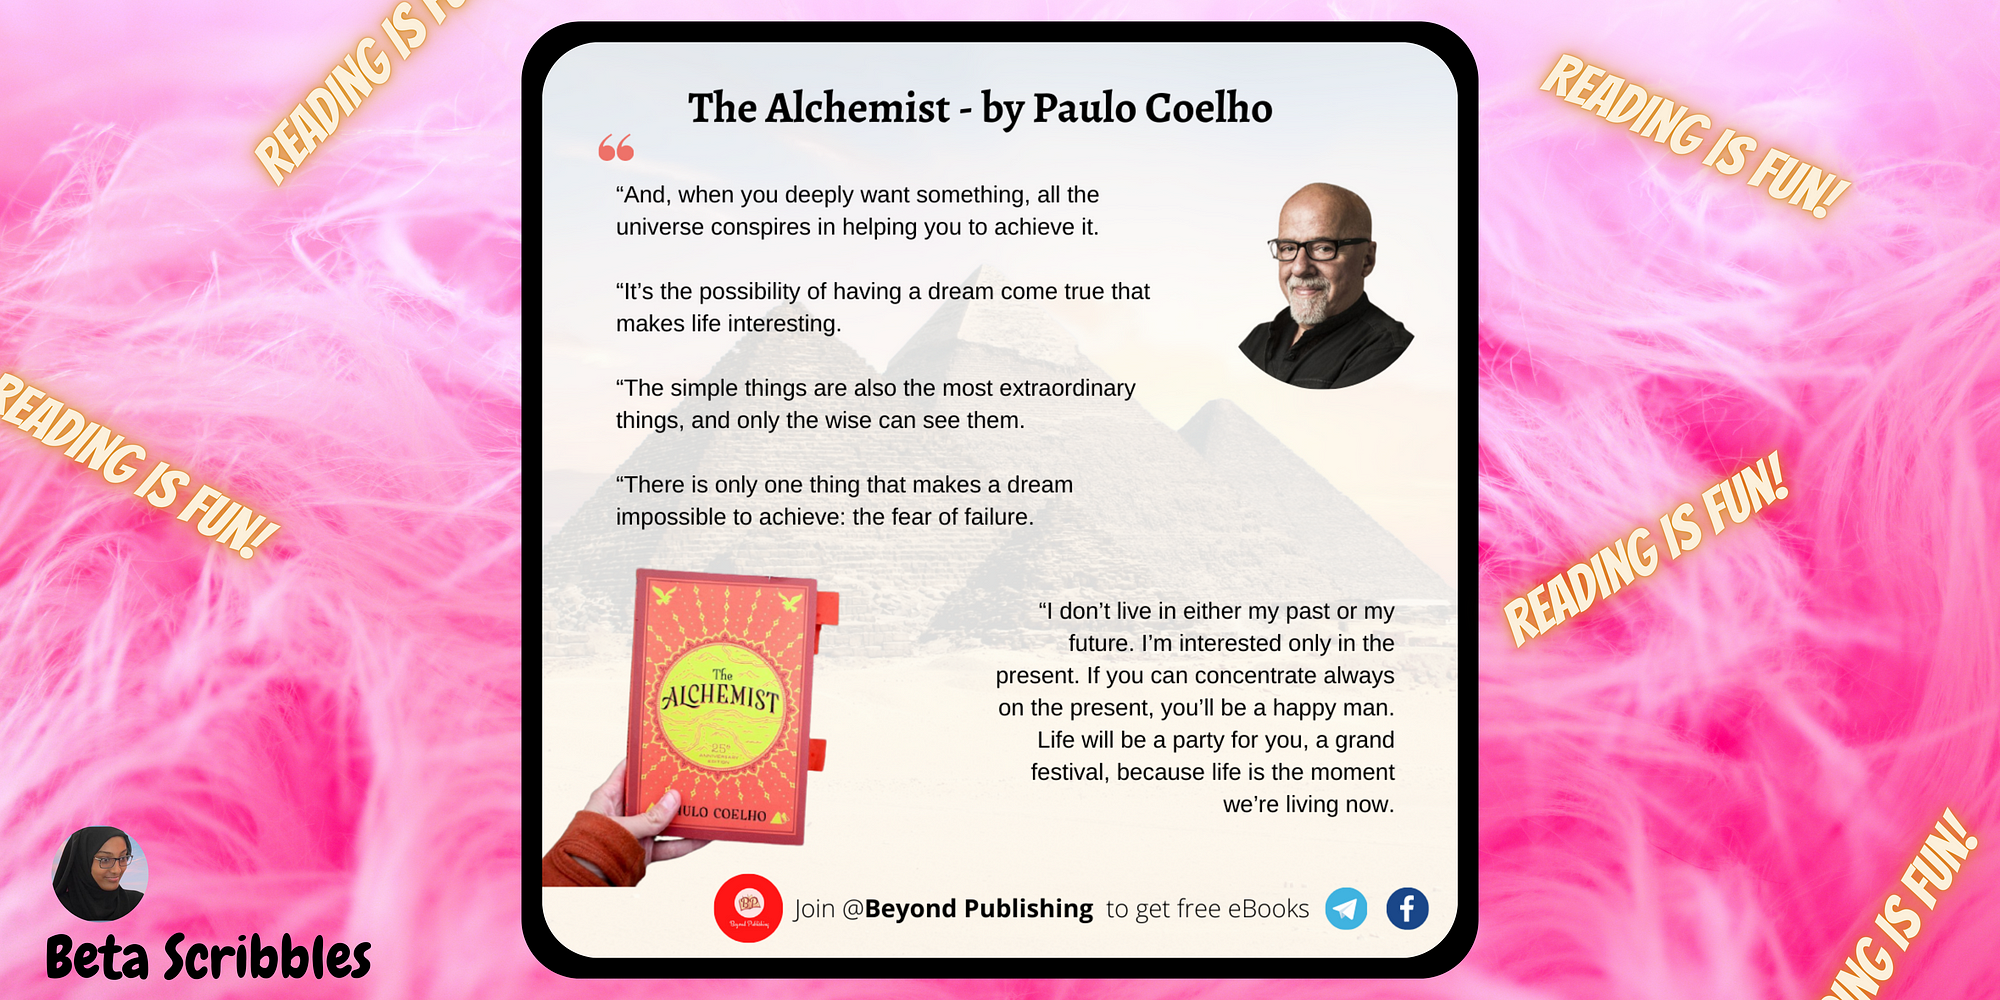 My Thoughts on 'The Alchemist' — by Paulo Coelho | by Beta Scribbles |  Medium